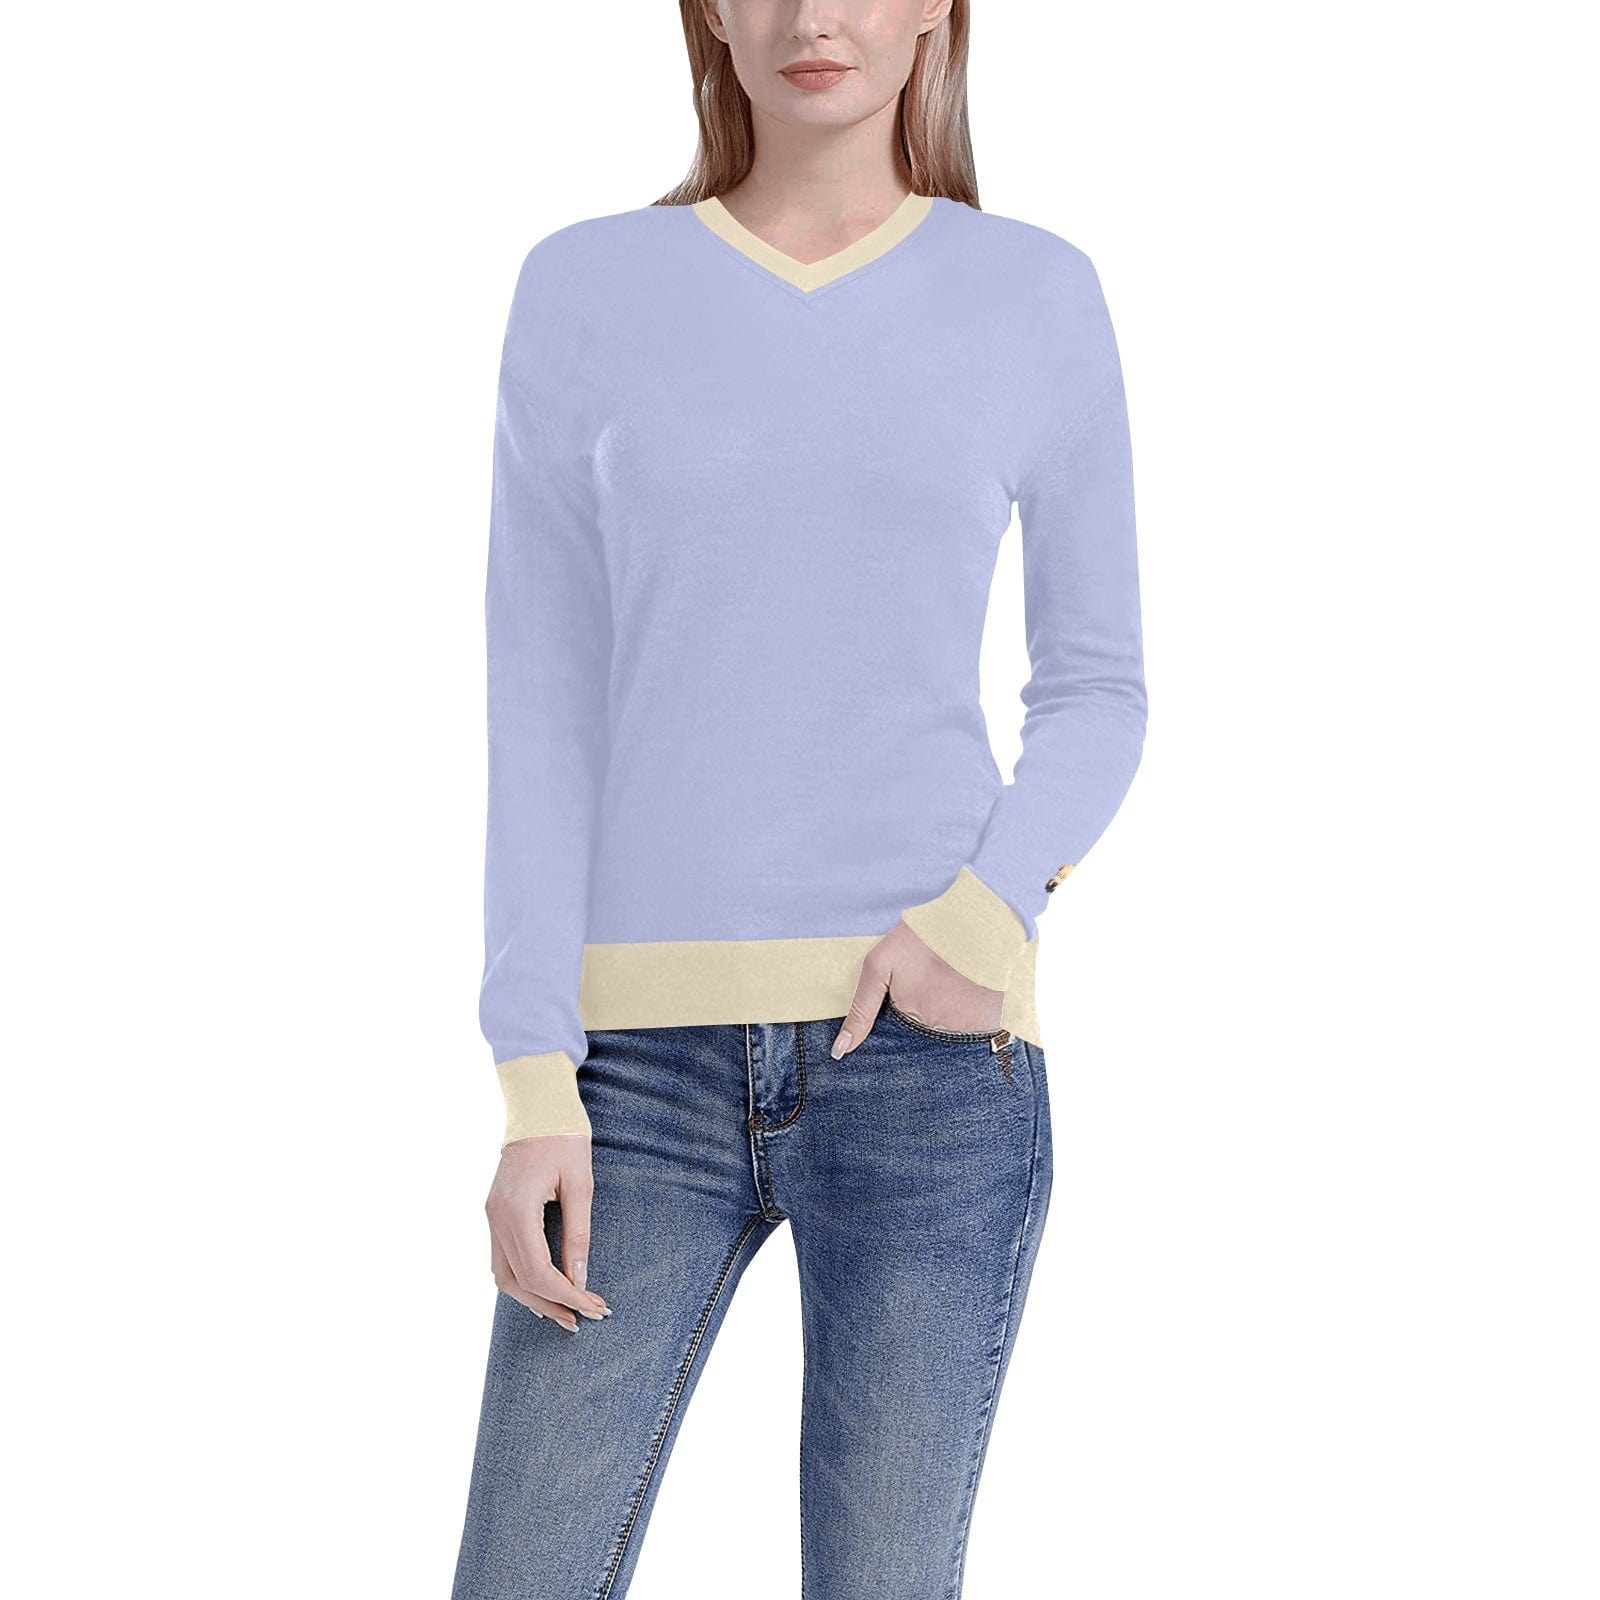 the wheaten store Long Sleeved Shirt 12 colors